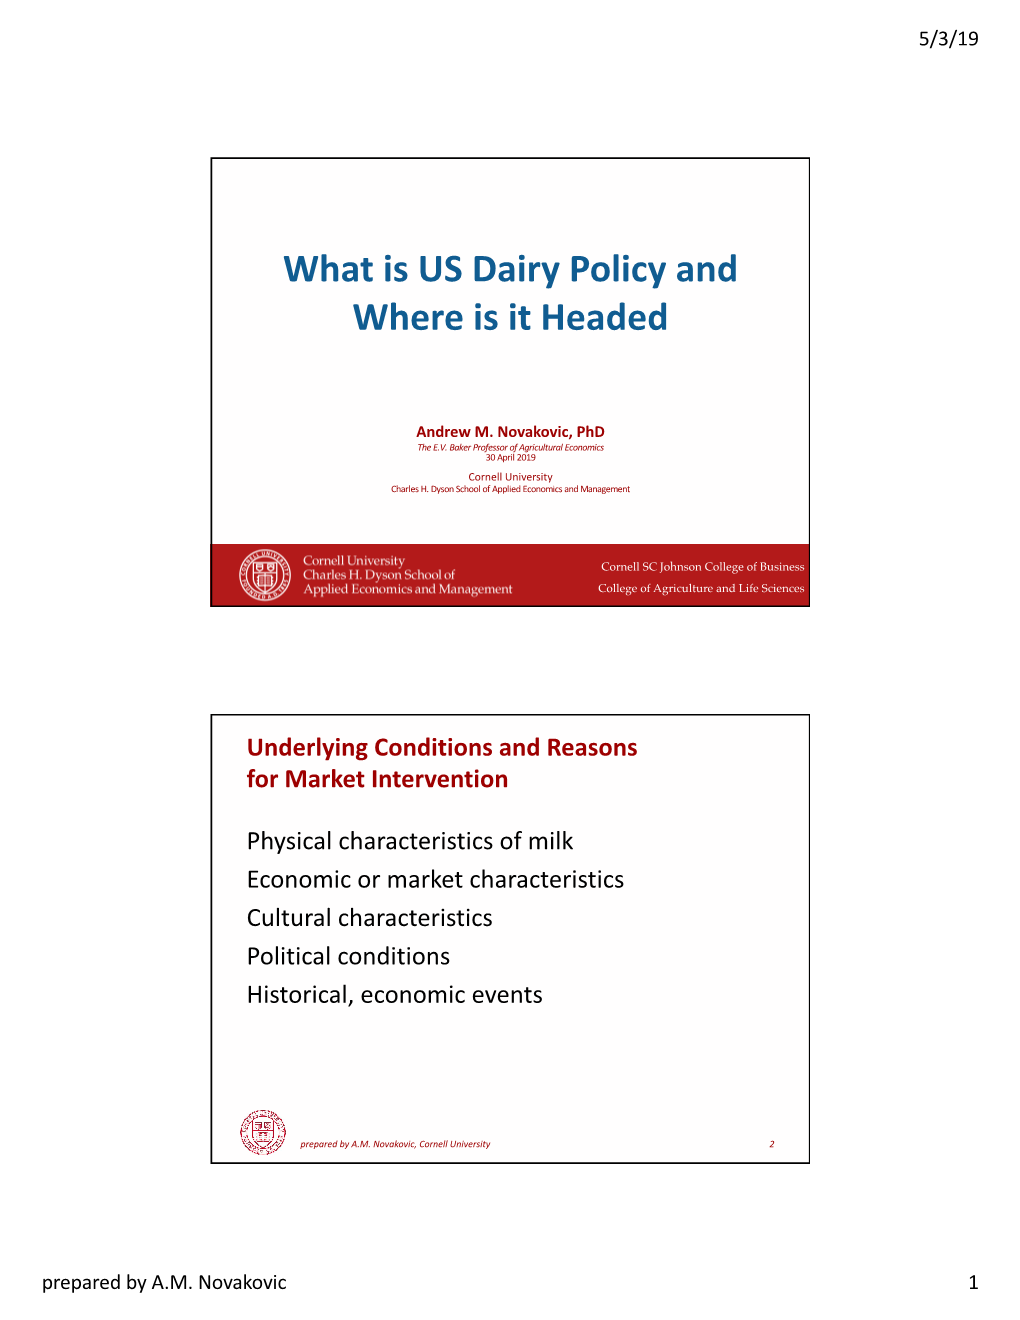 What Is US Dairy Policy and Where Is It Headed